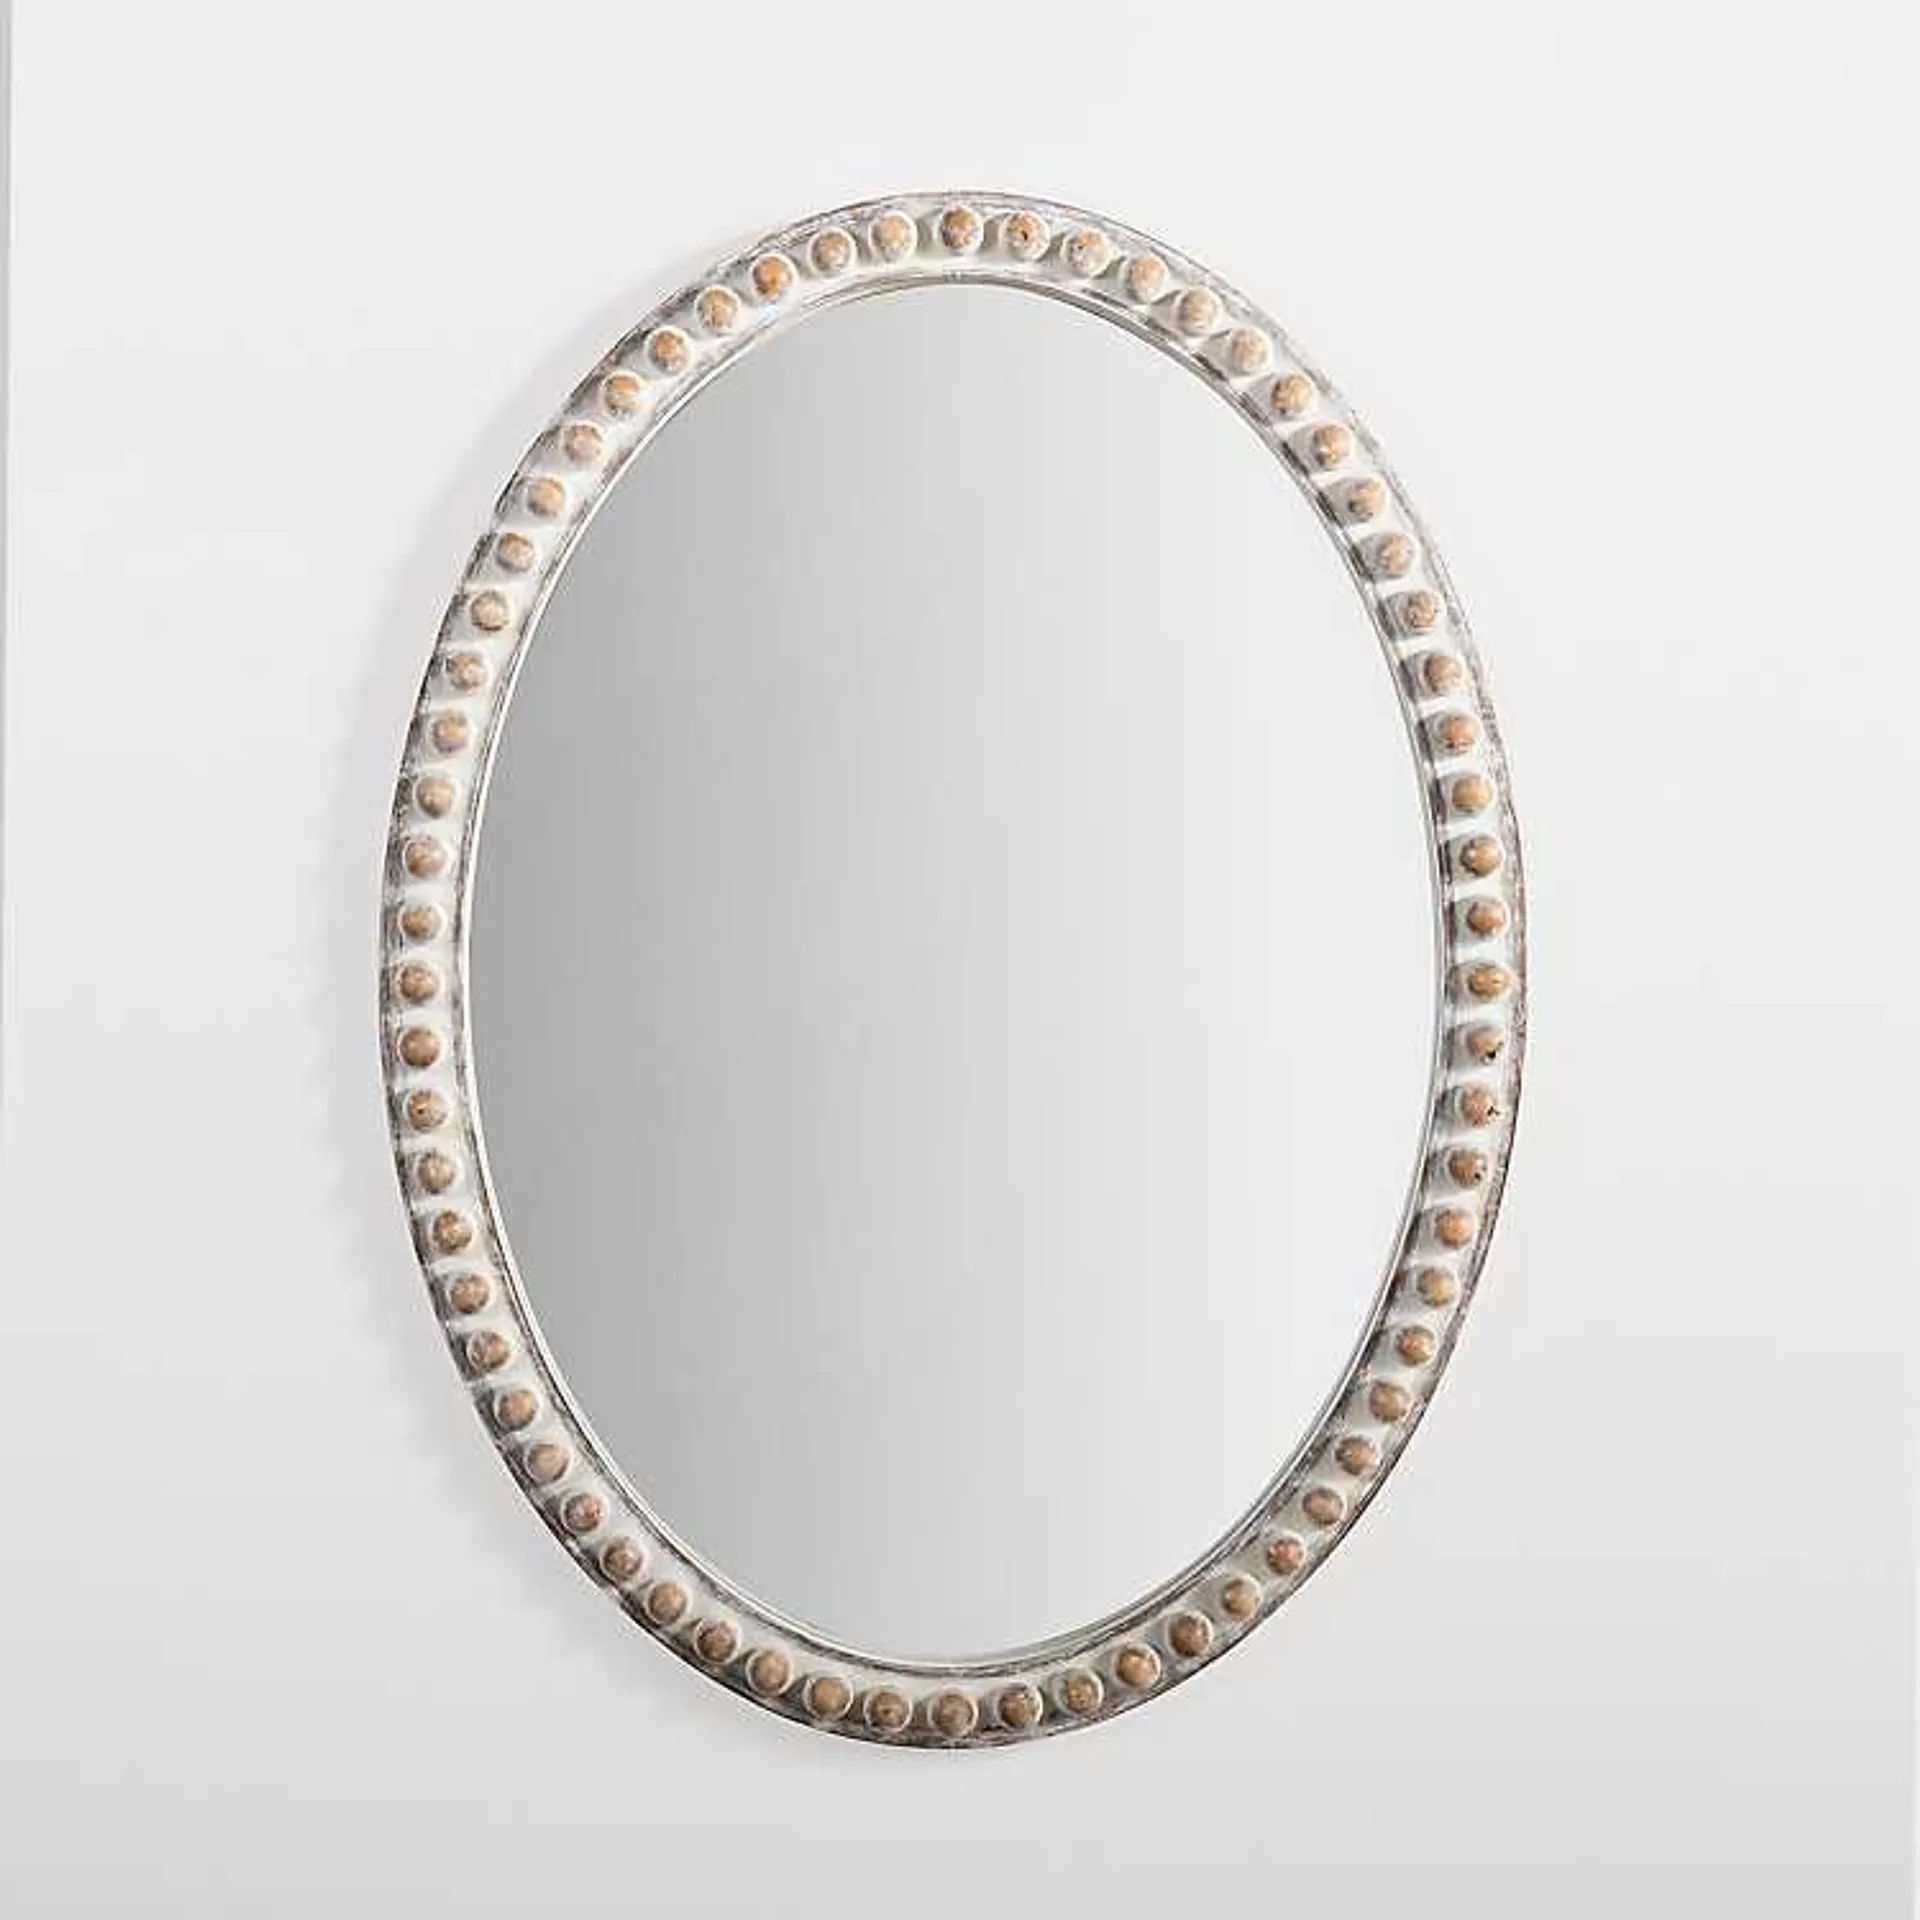 Natural Wood Beaded Oval Mirror